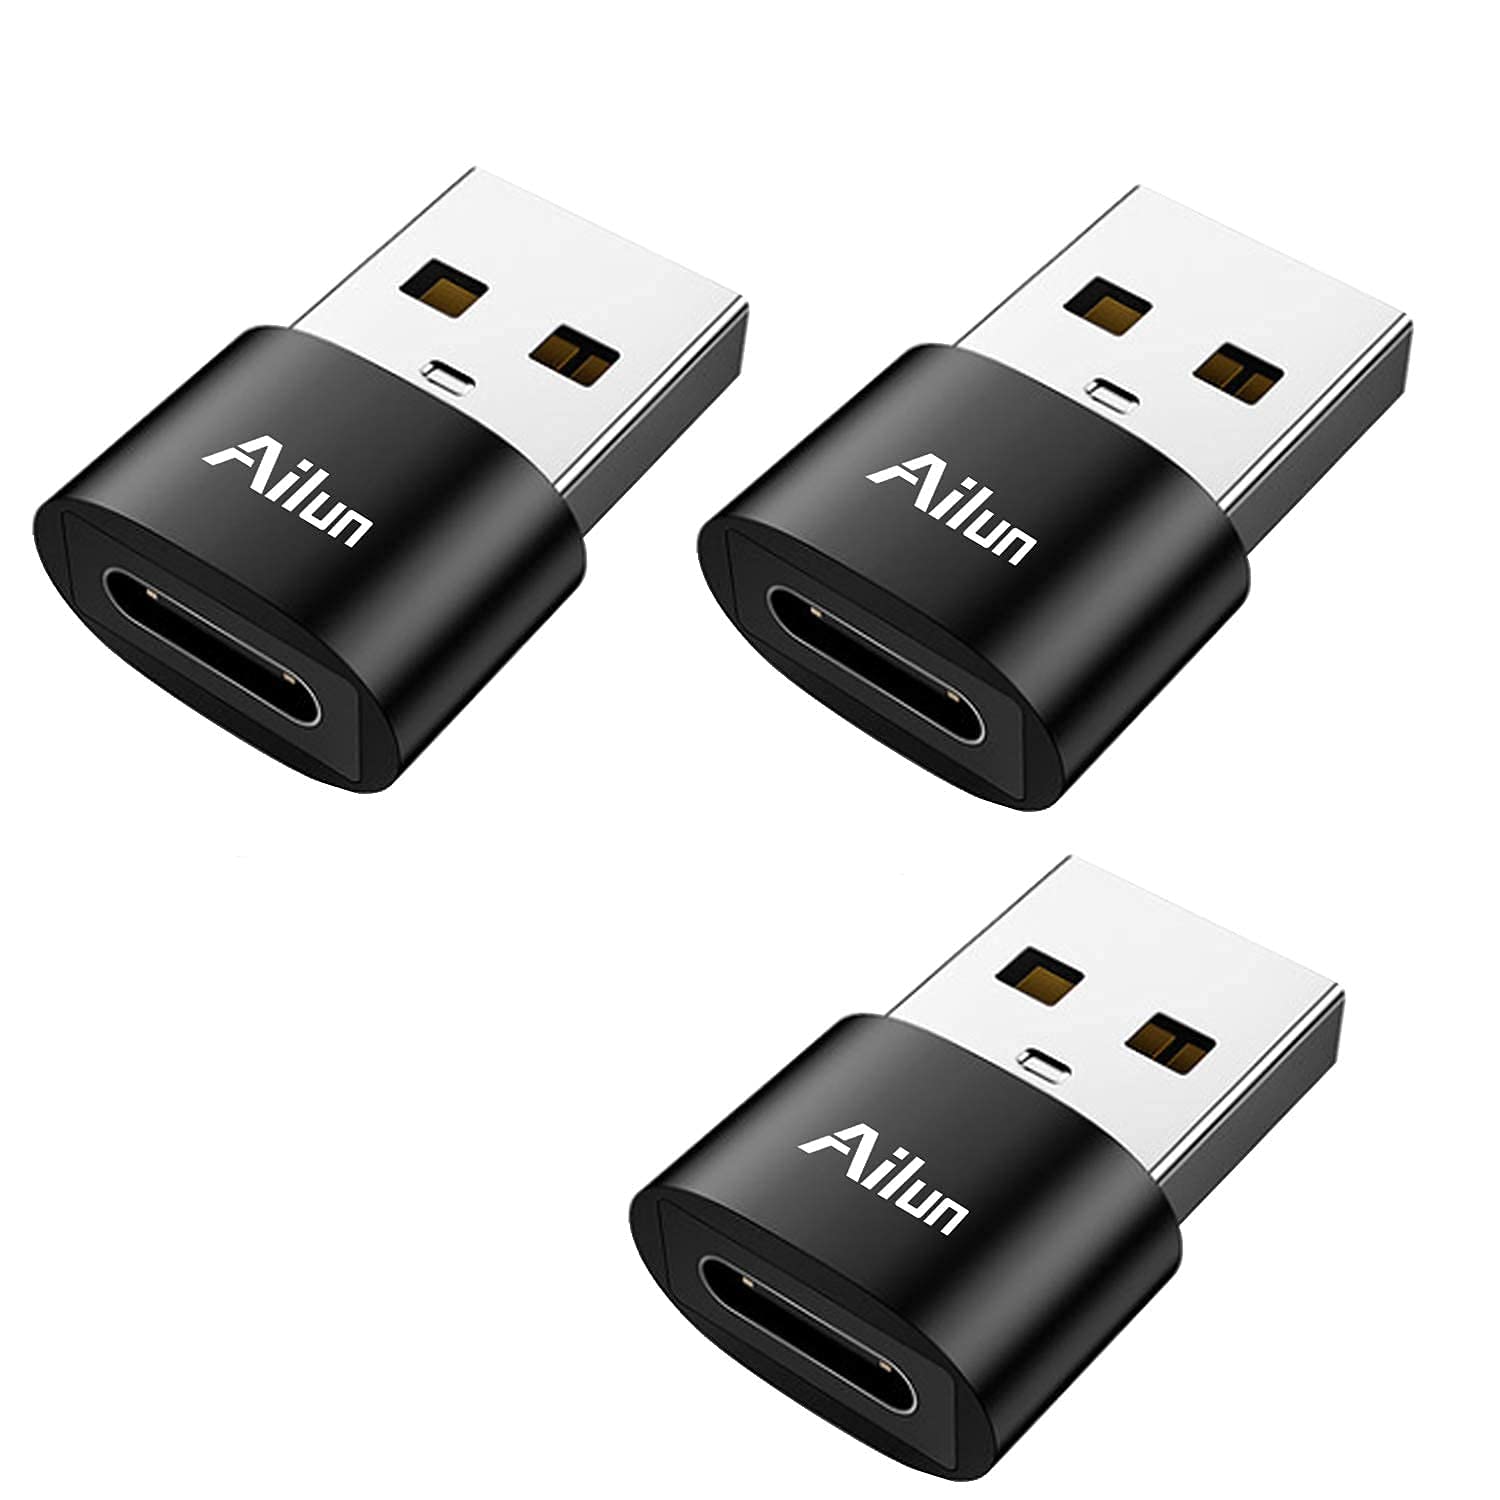 Ailun USB C to USB C Cable 10ft 3Pack High Durability 60W 3A USB Type C Devices Charging and USB C Female to USB A Male Adapter 3 Pack Type C to A Charger Cable Adapter